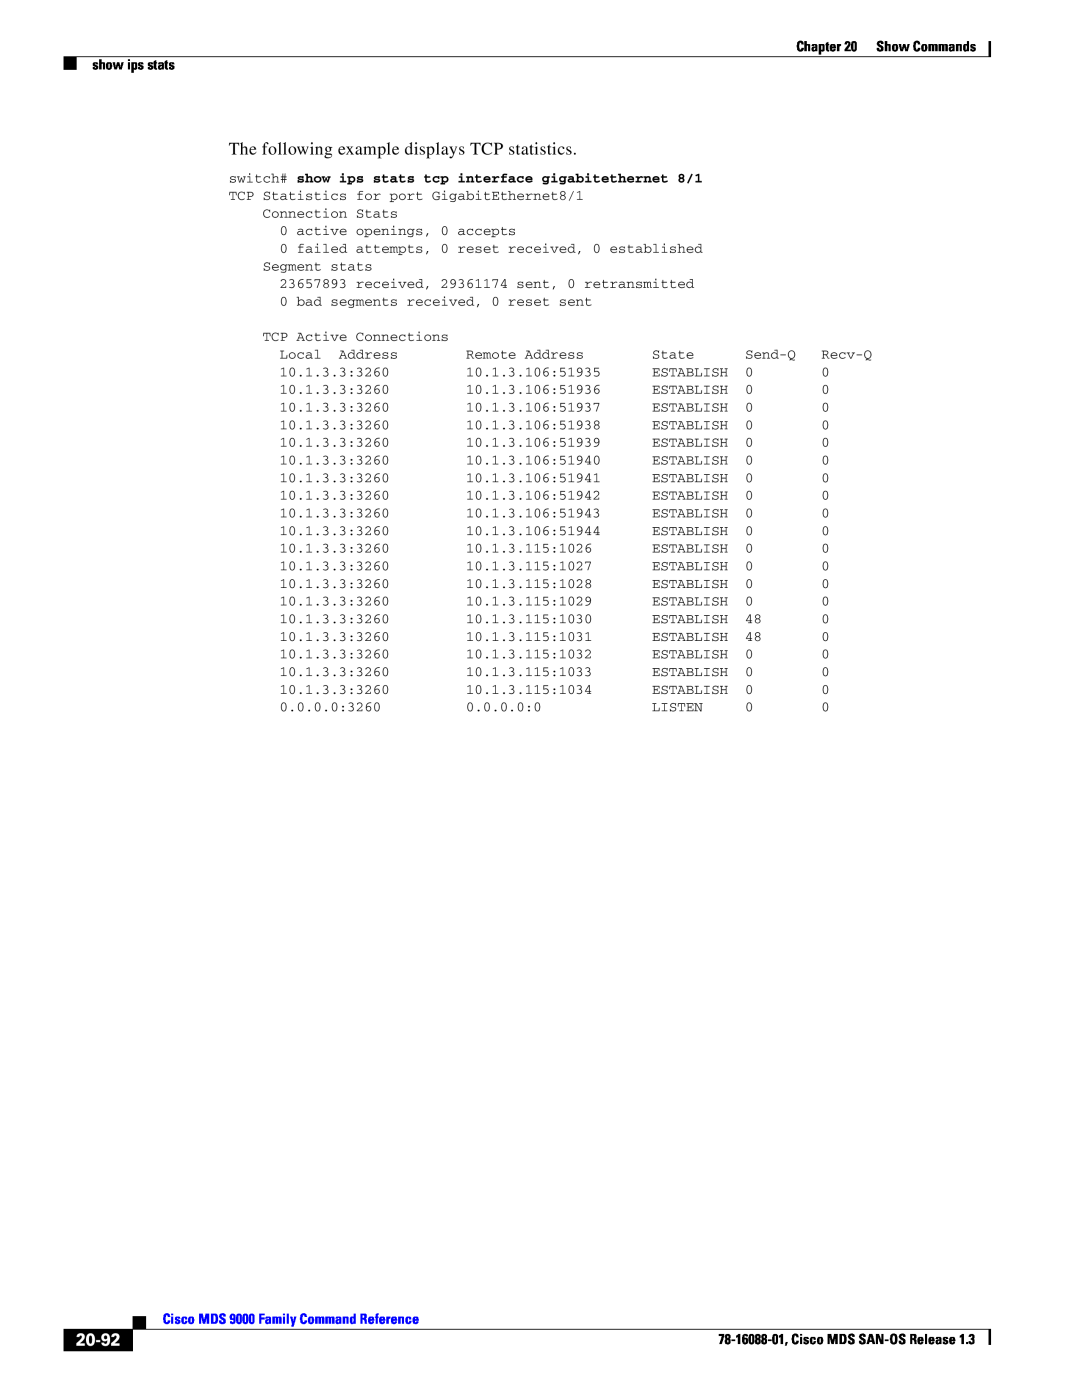 Cisco Systems MDS 9000 manual 20-92, The following example displays TCP statistics, Show Commands show ips stats, Recv-Q 